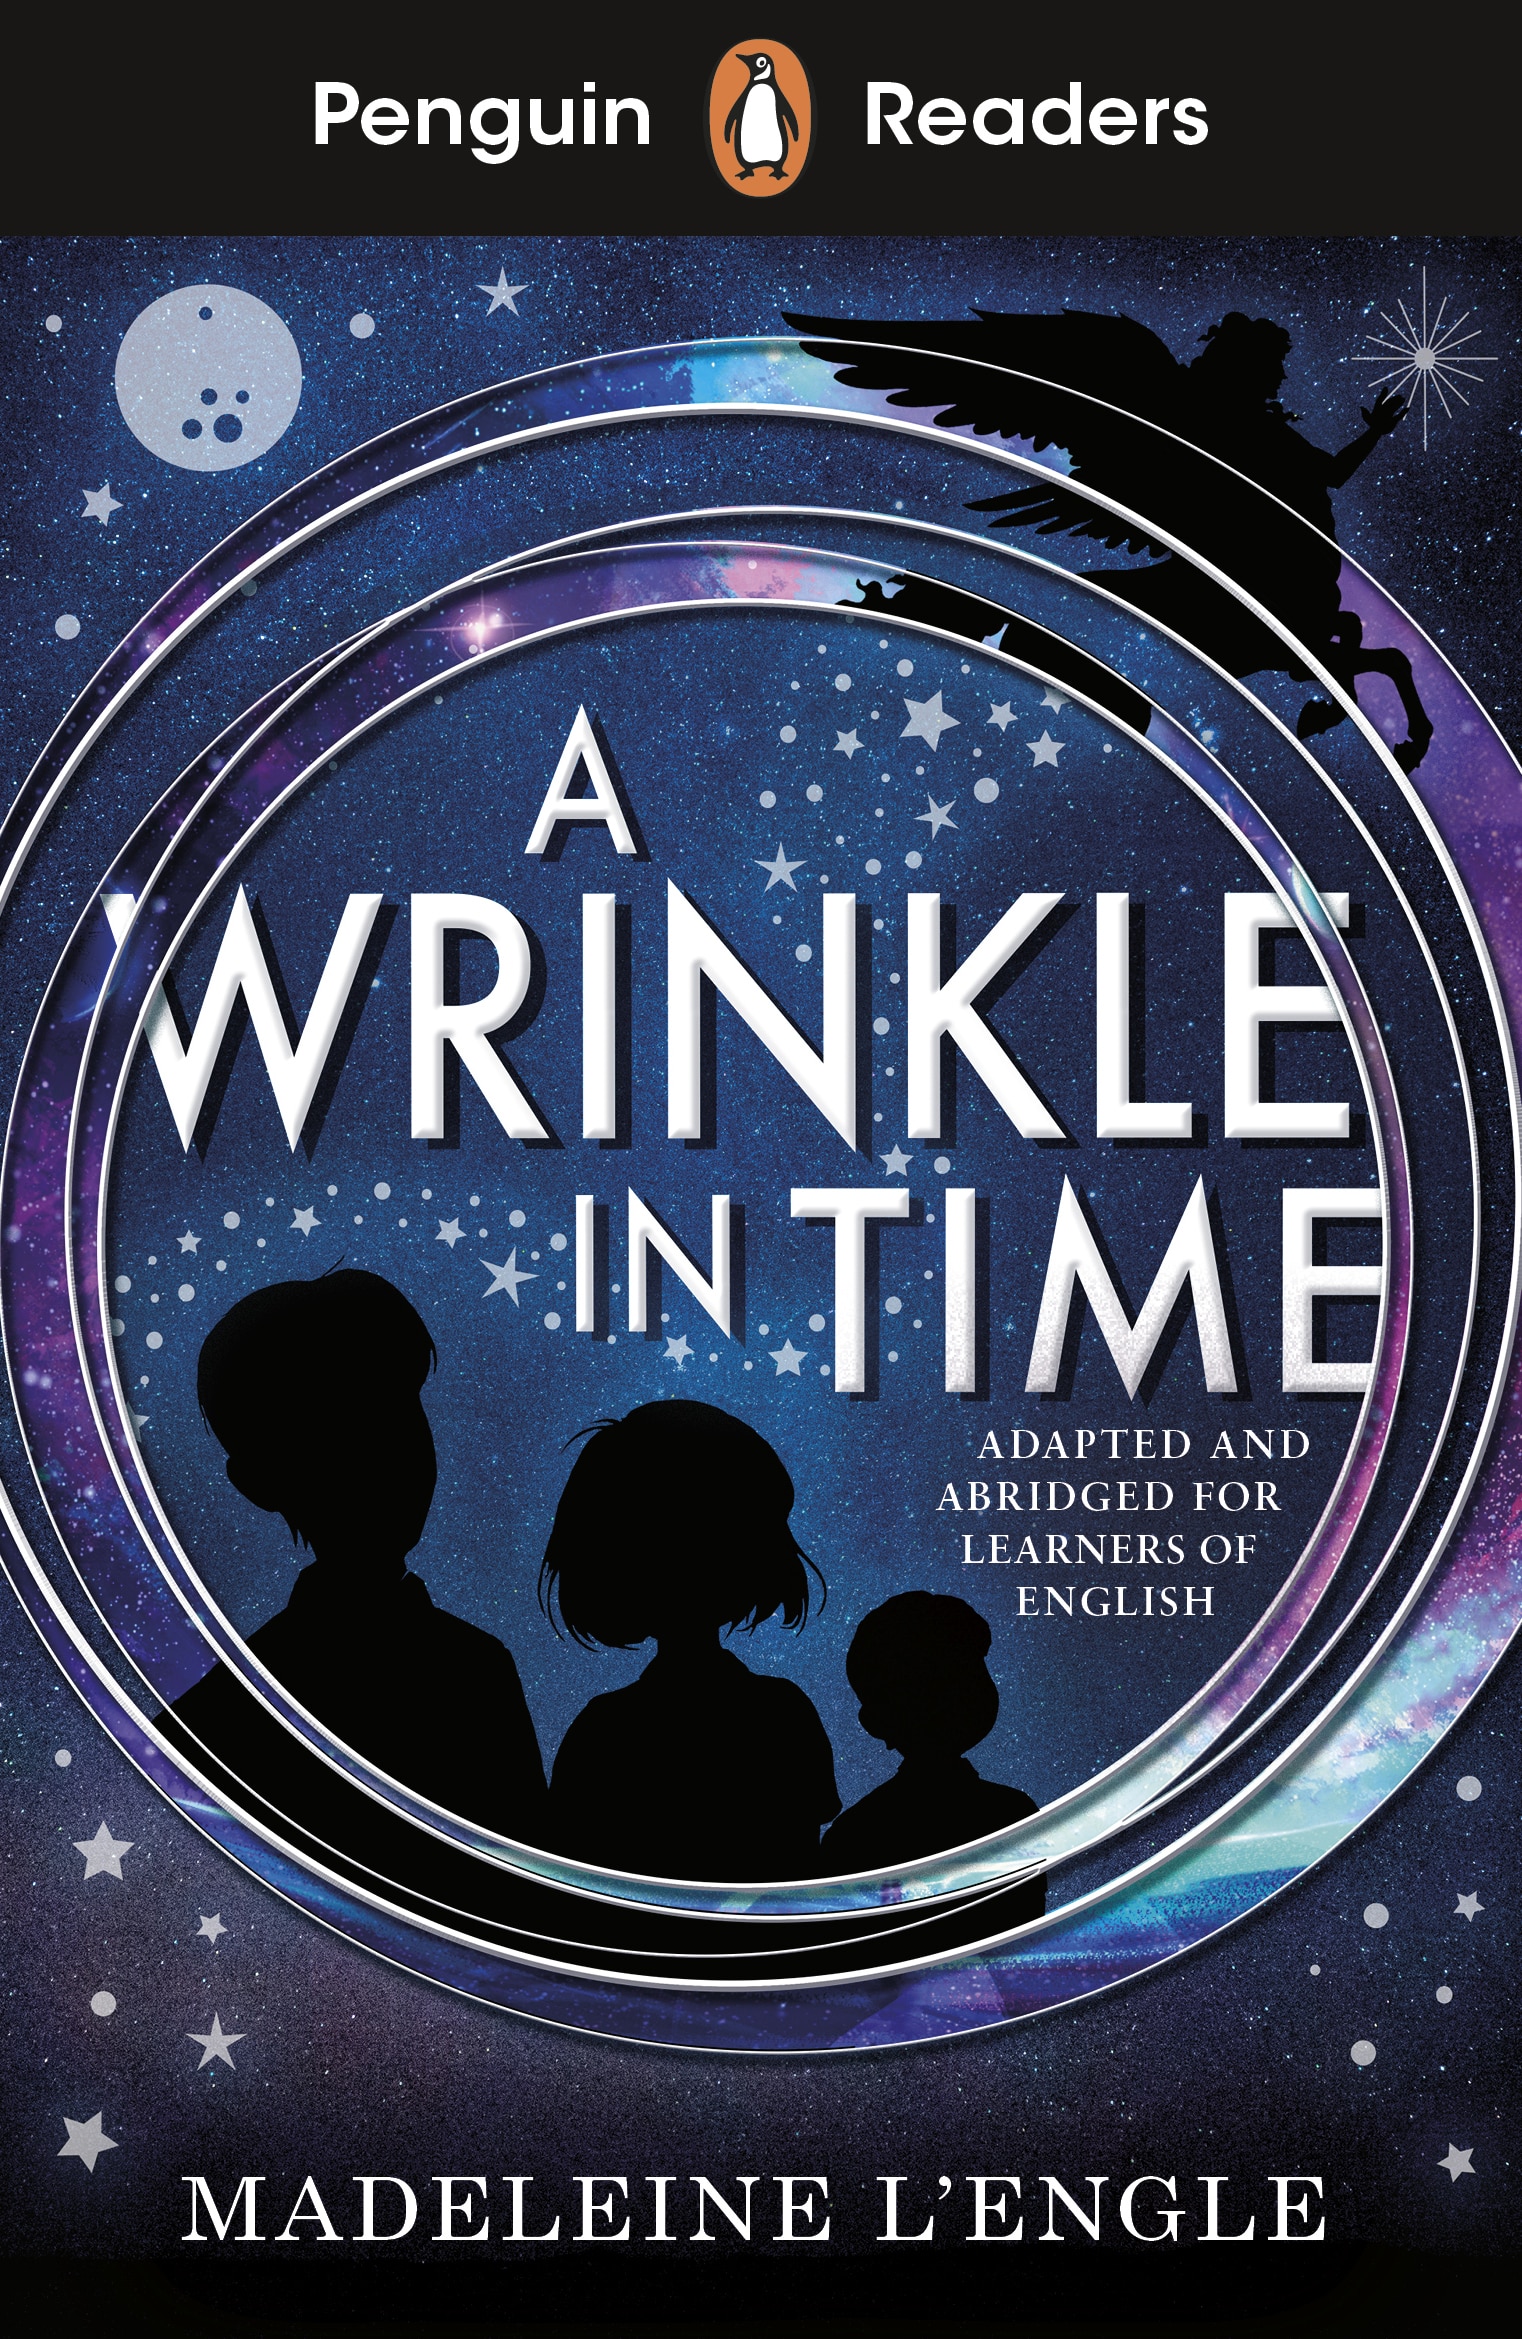 book review for a wrinkle in time